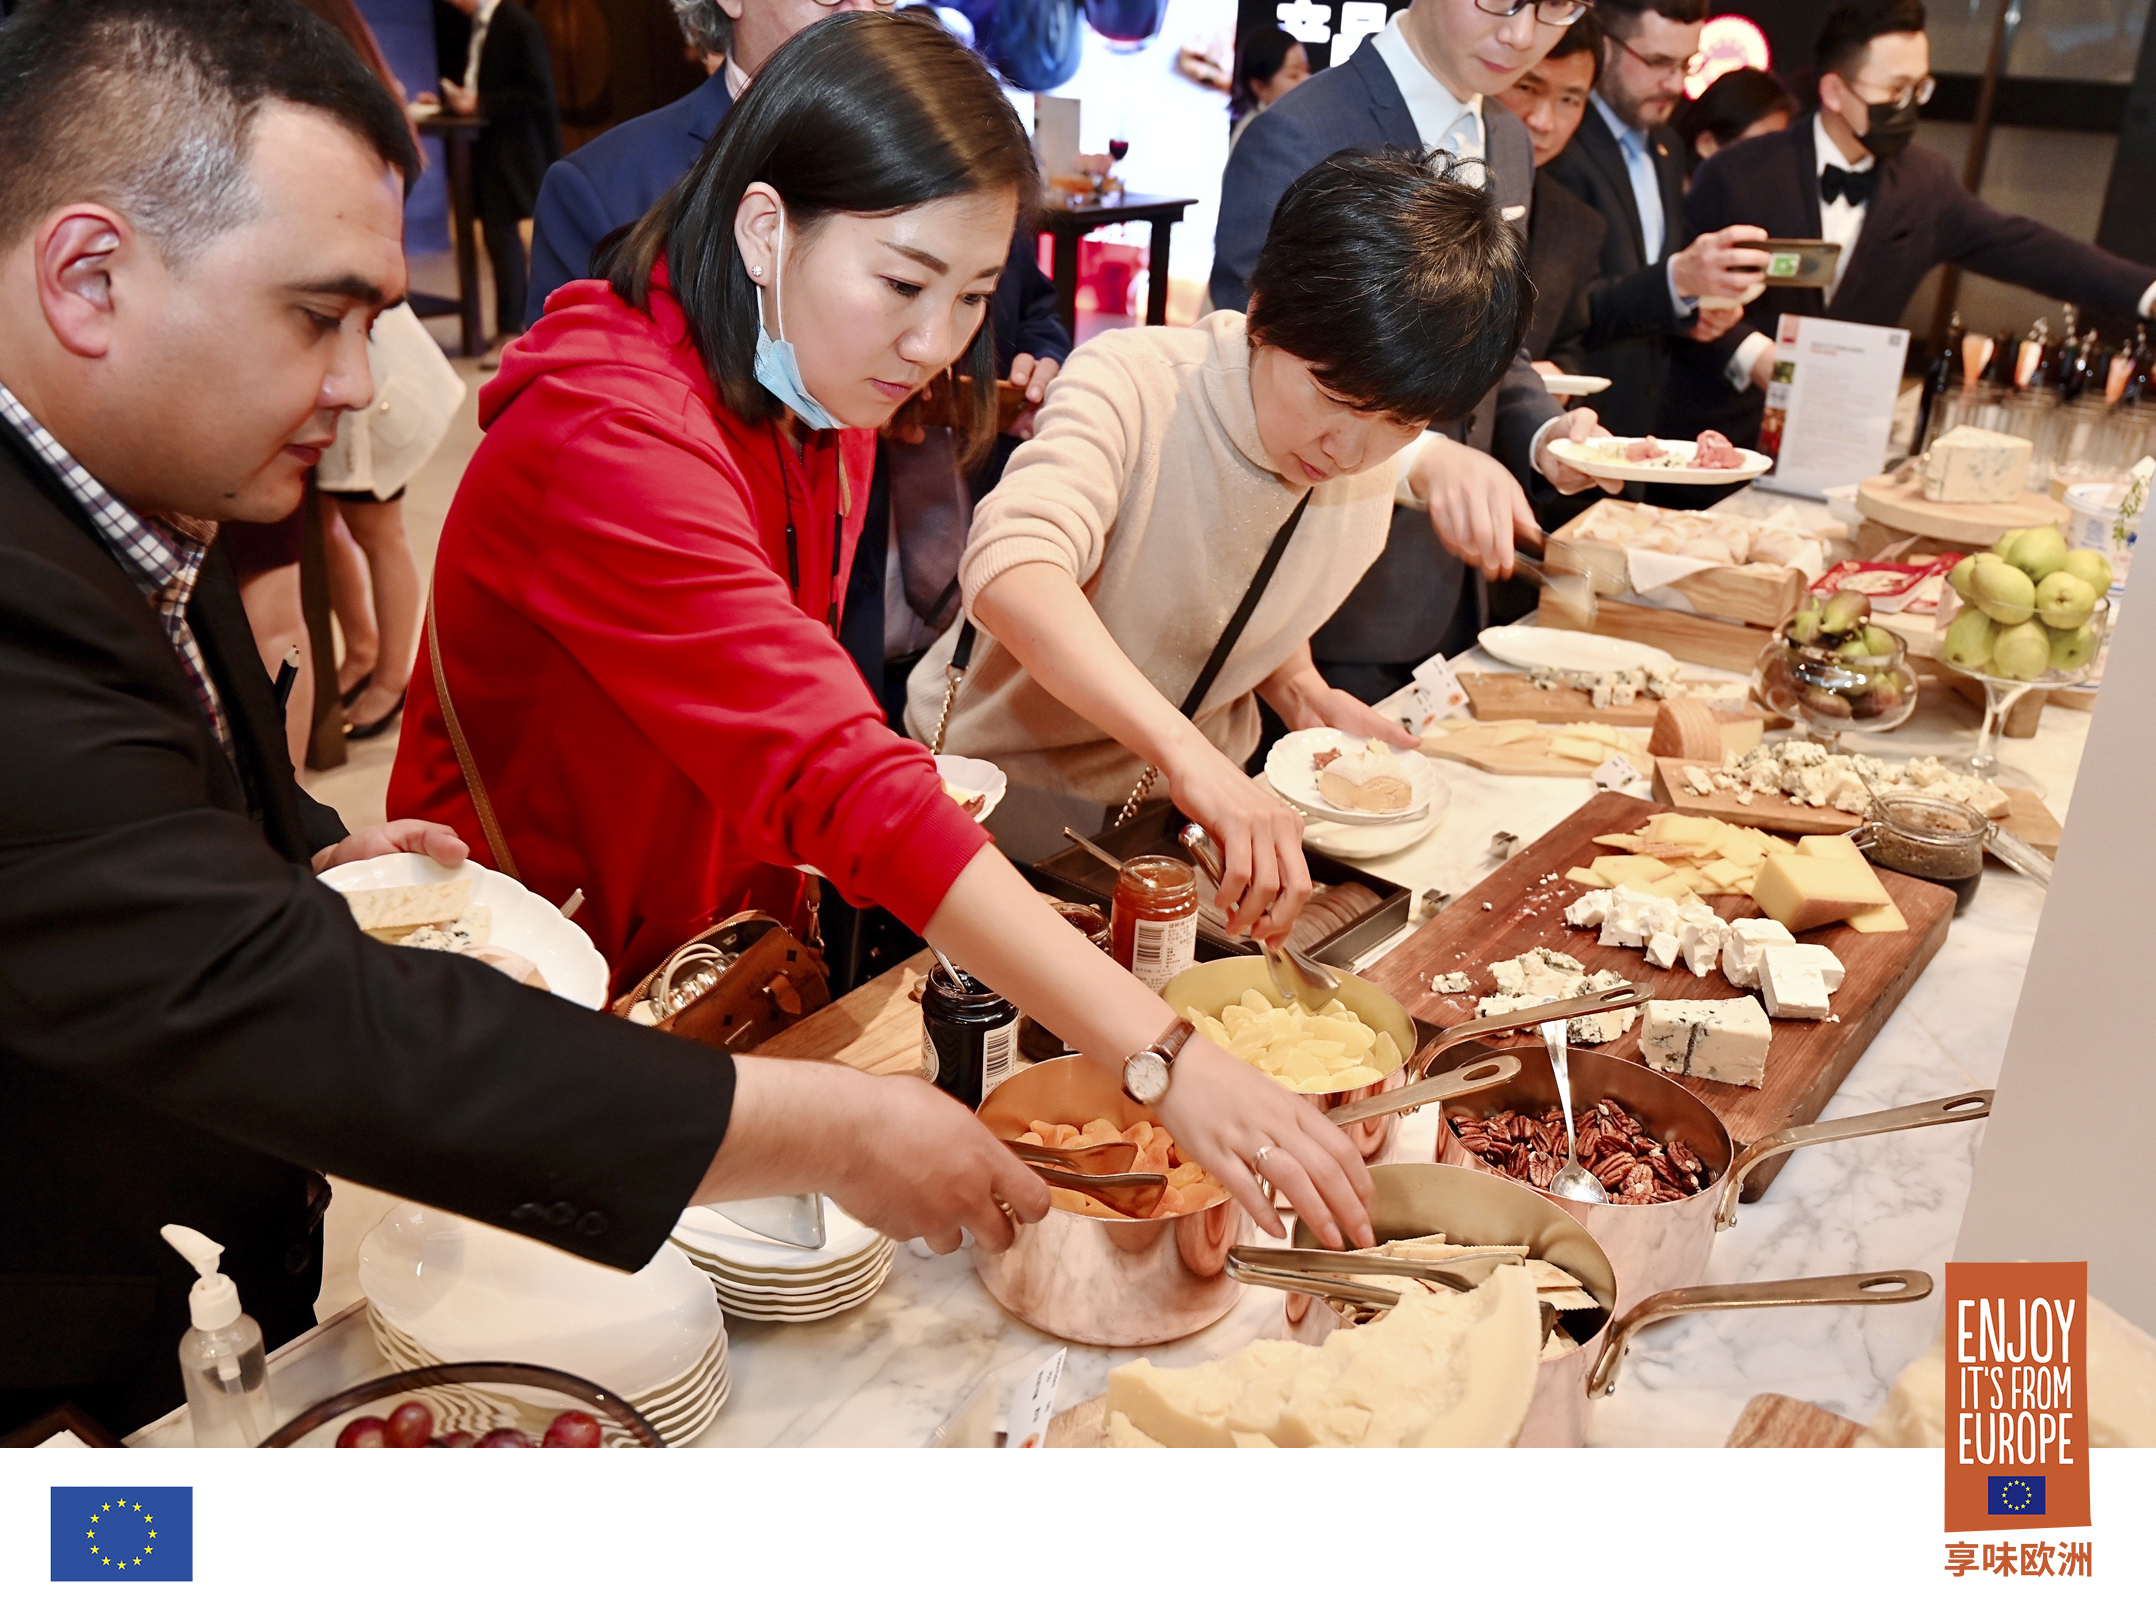 Participants selecting dishes from buffet.